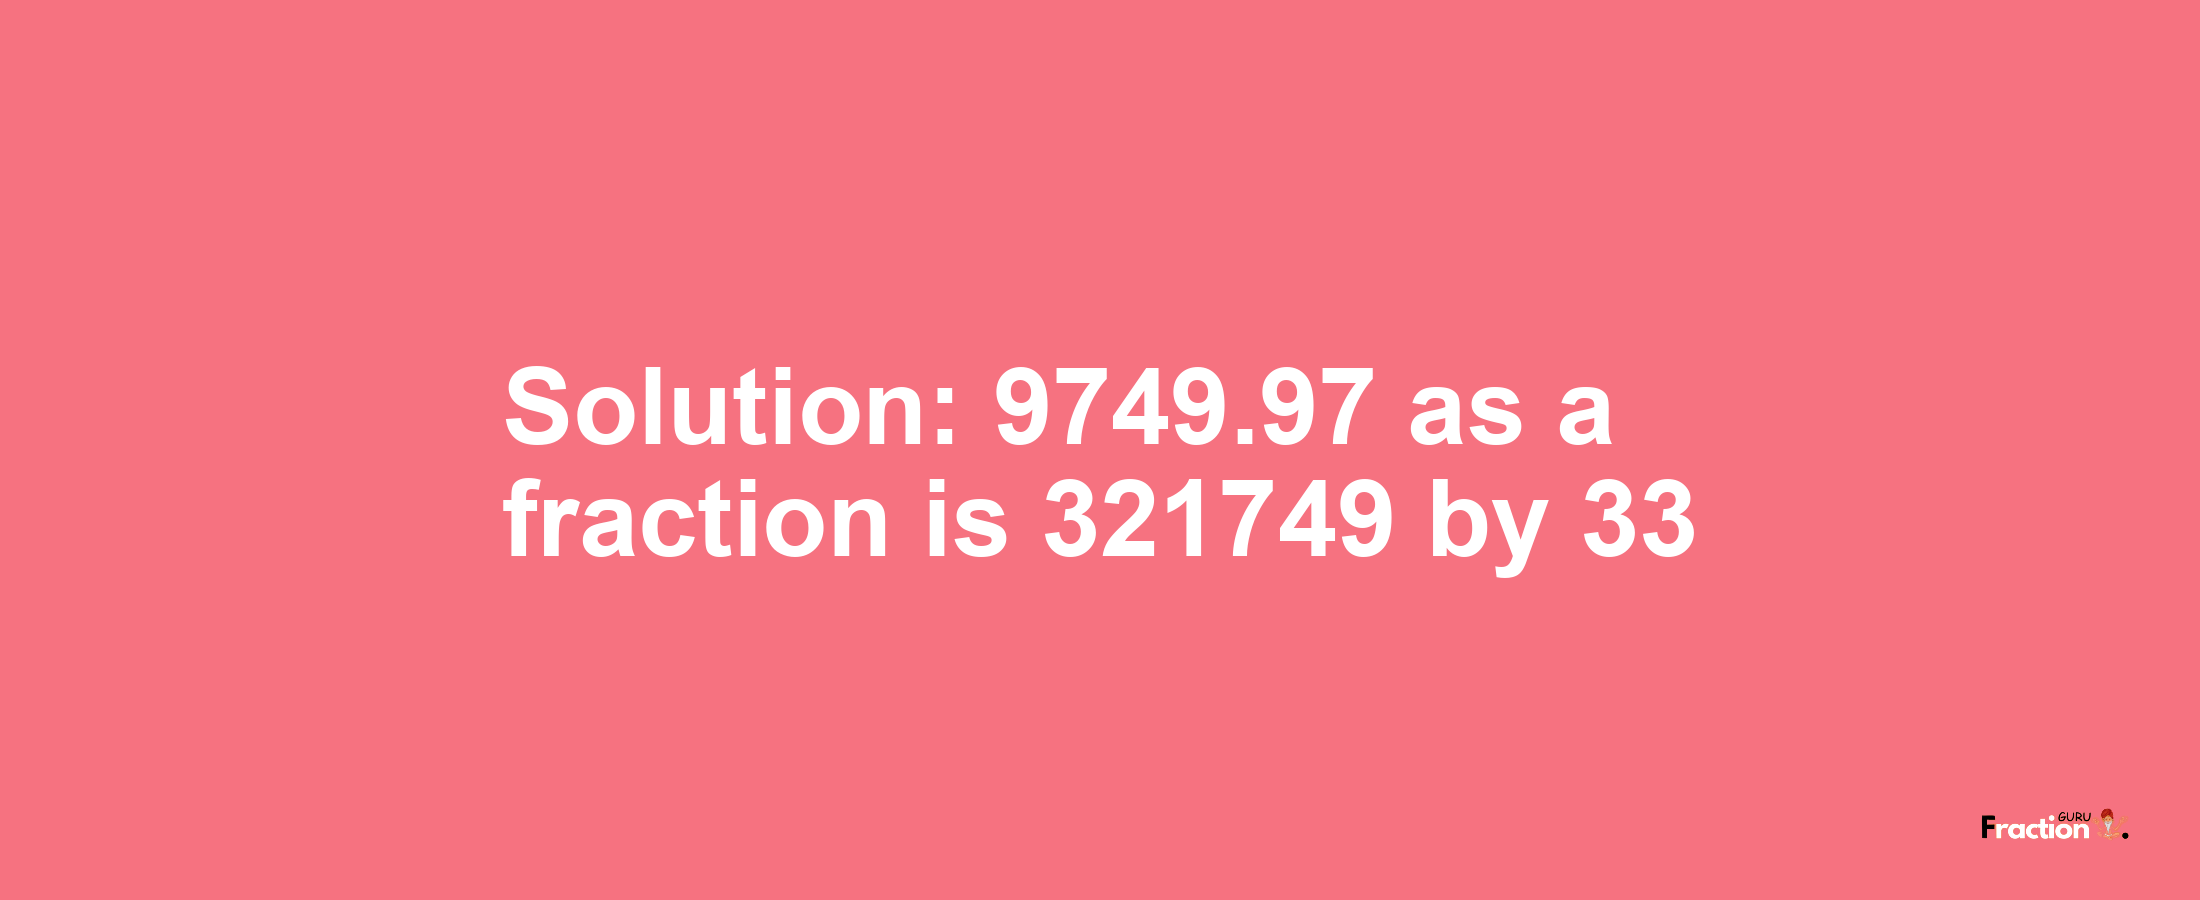 Solution:9749.97 as a fraction is 321749/33